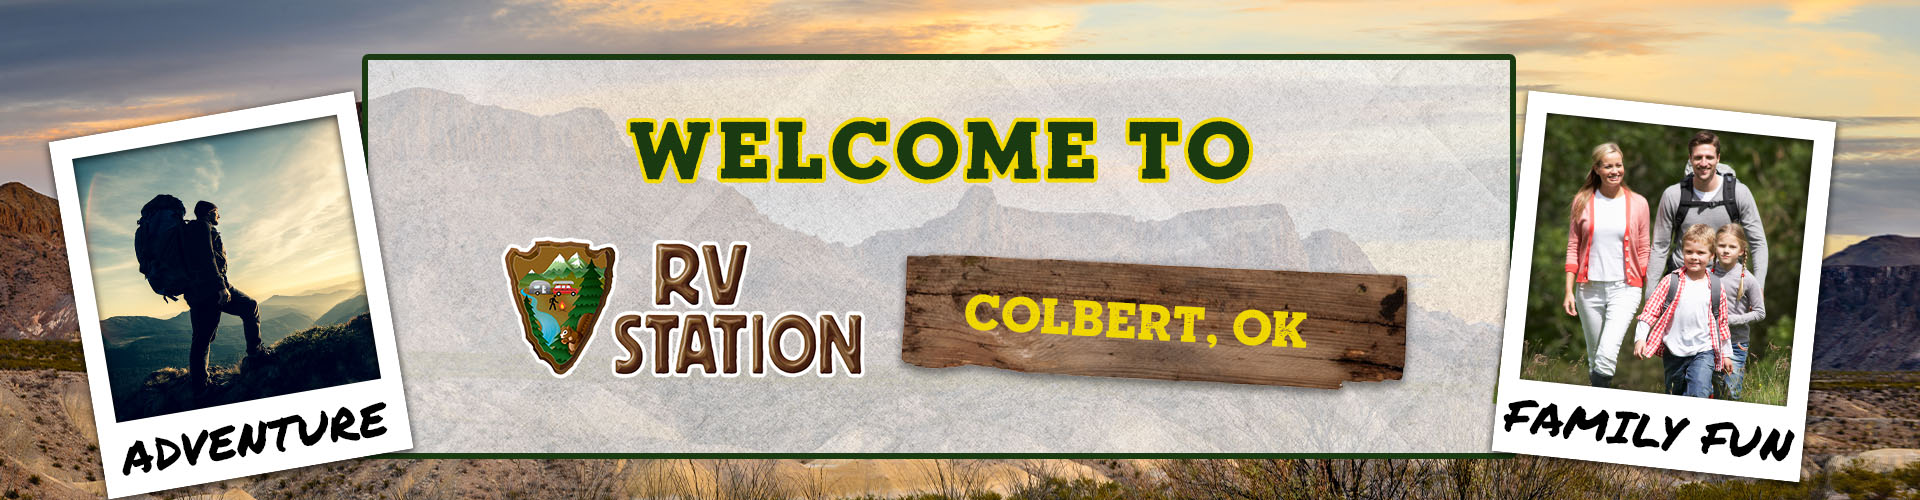 Welcome RV Station - Colbert